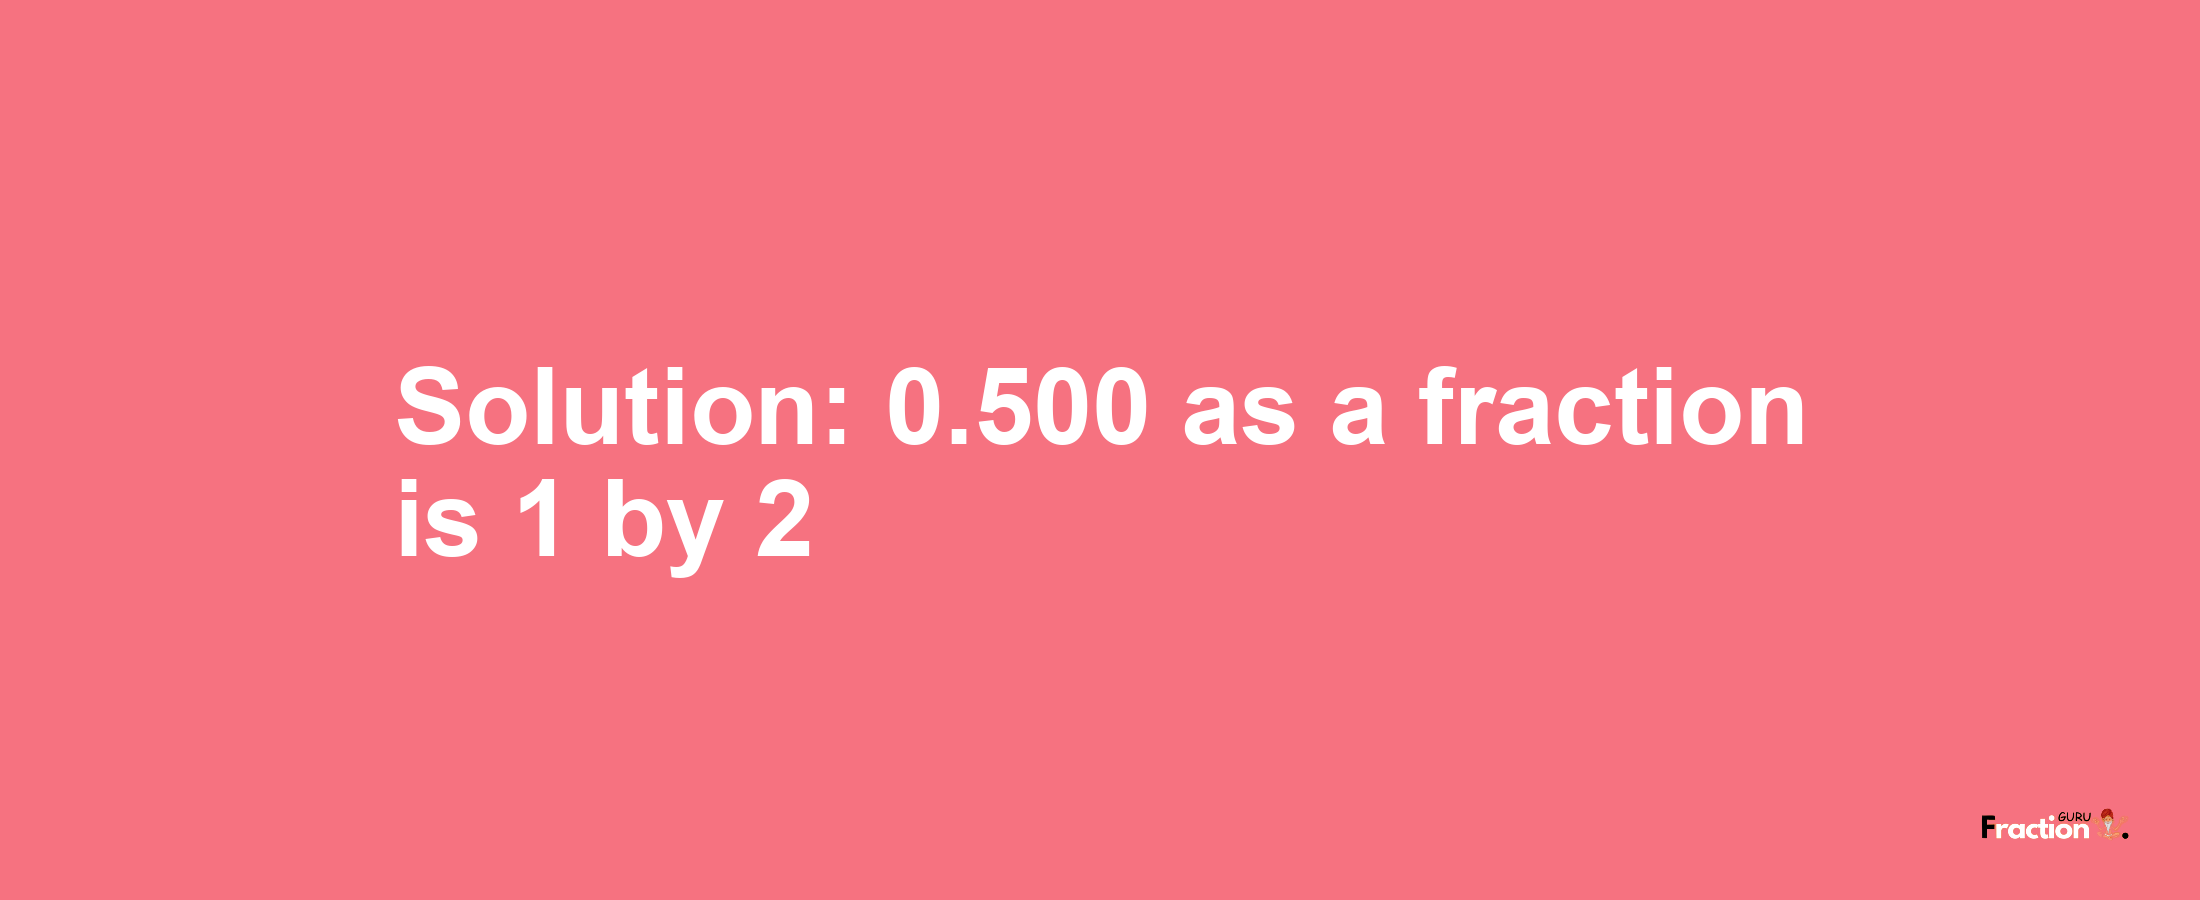 Solution:0.500 as a fraction is 1/2